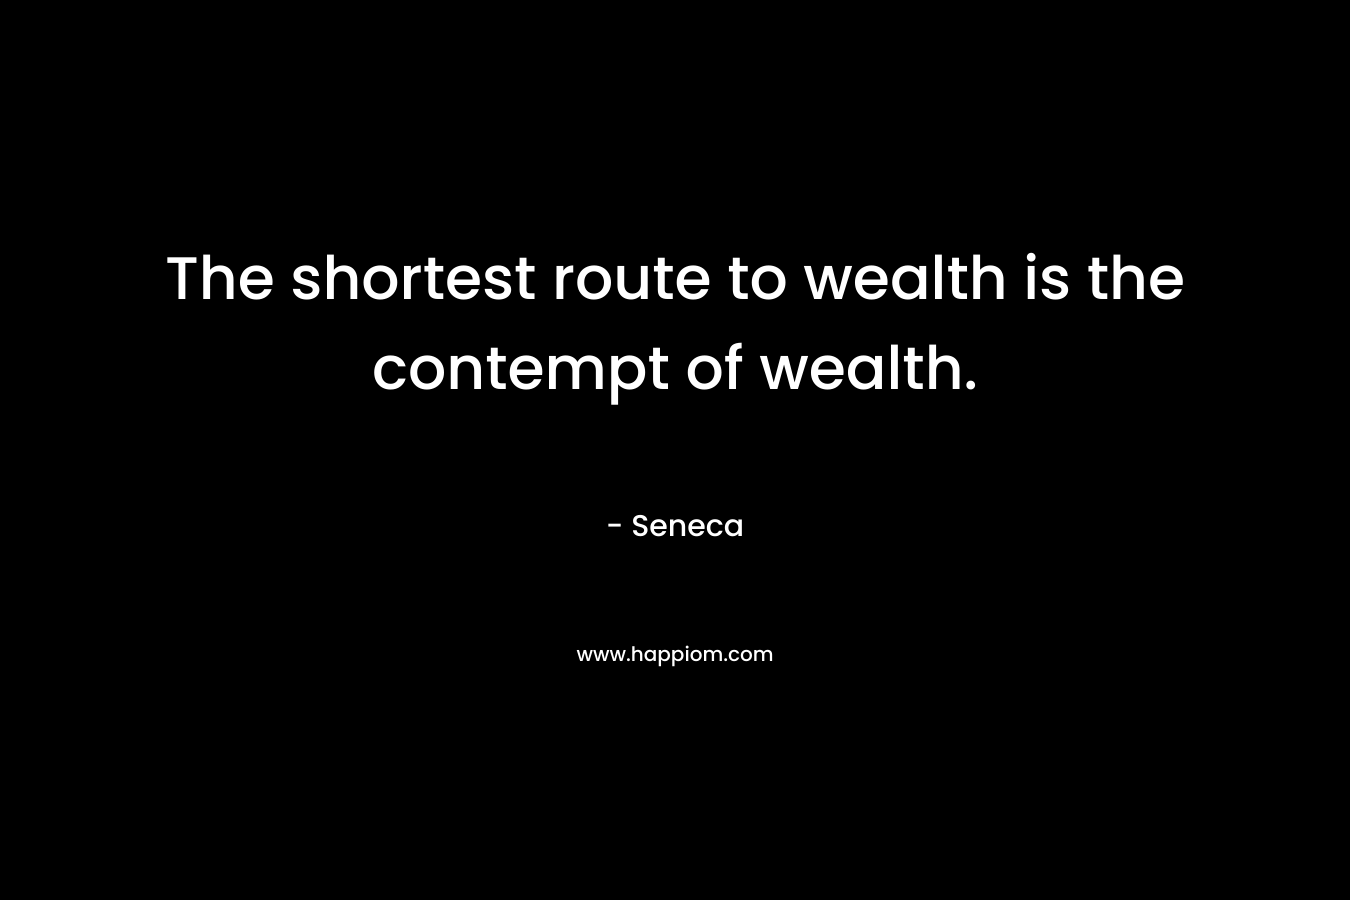 The shortest route to wealth is the contempt of wealth. – Seneca